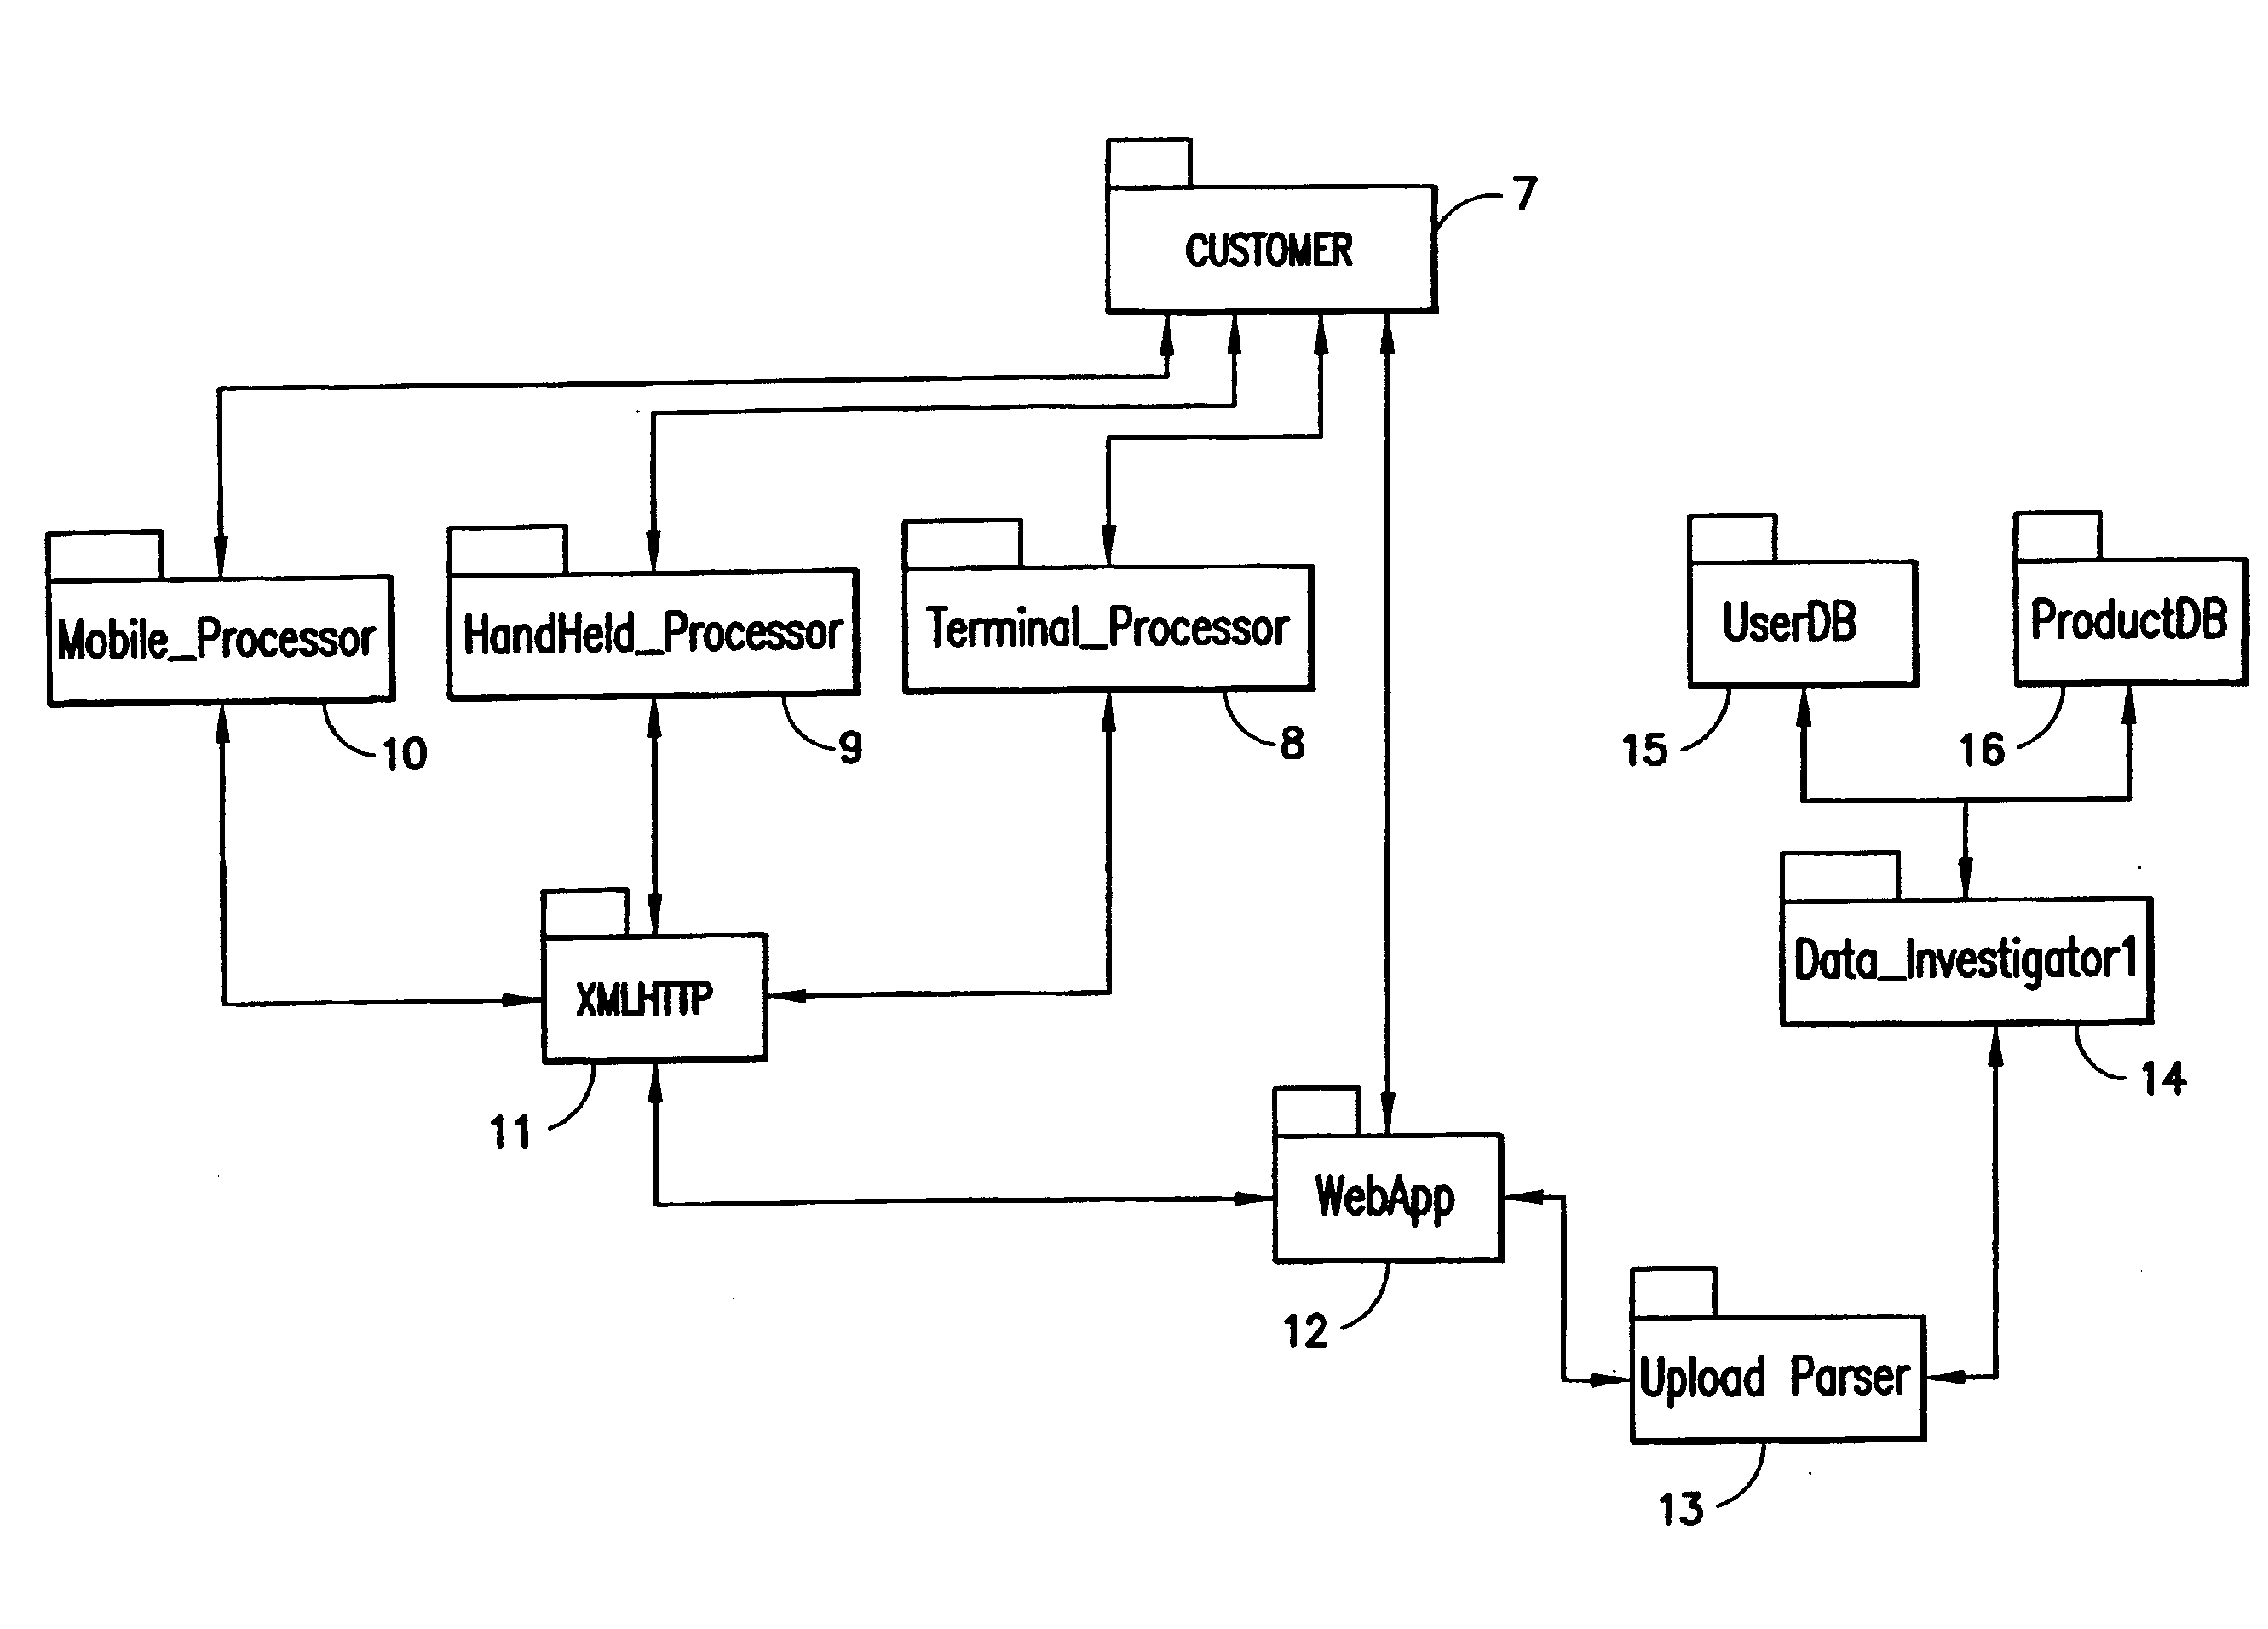 Systems and methods for a consumer to determine food/medicine interactions